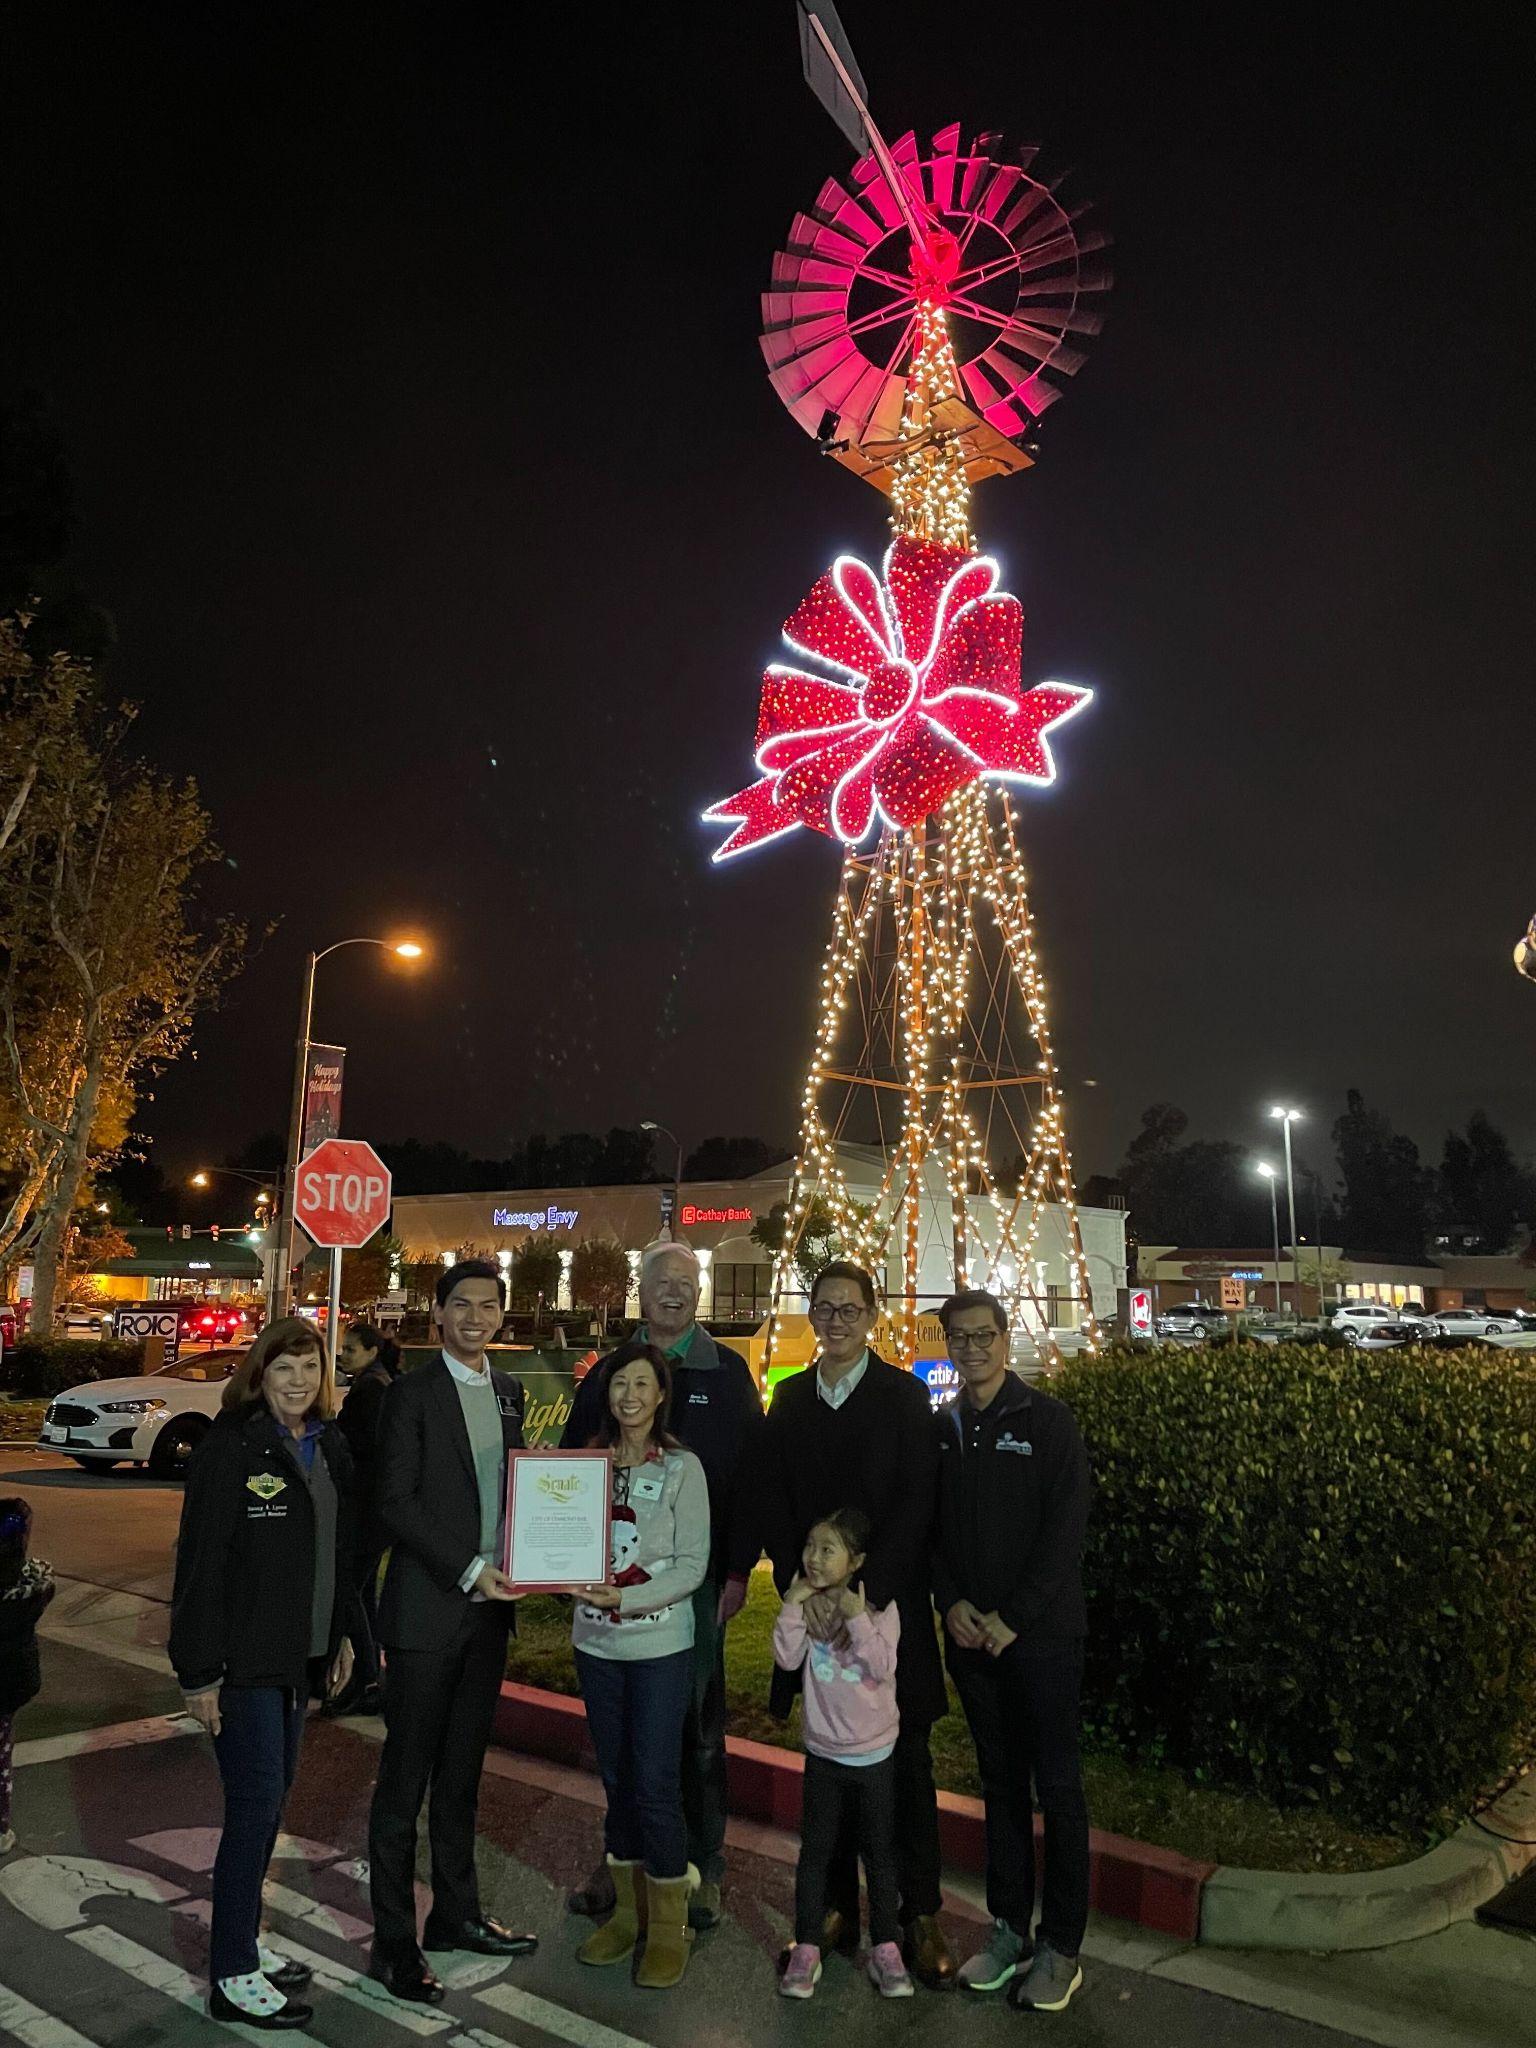 Group of people near lighted up Christmas windmill.